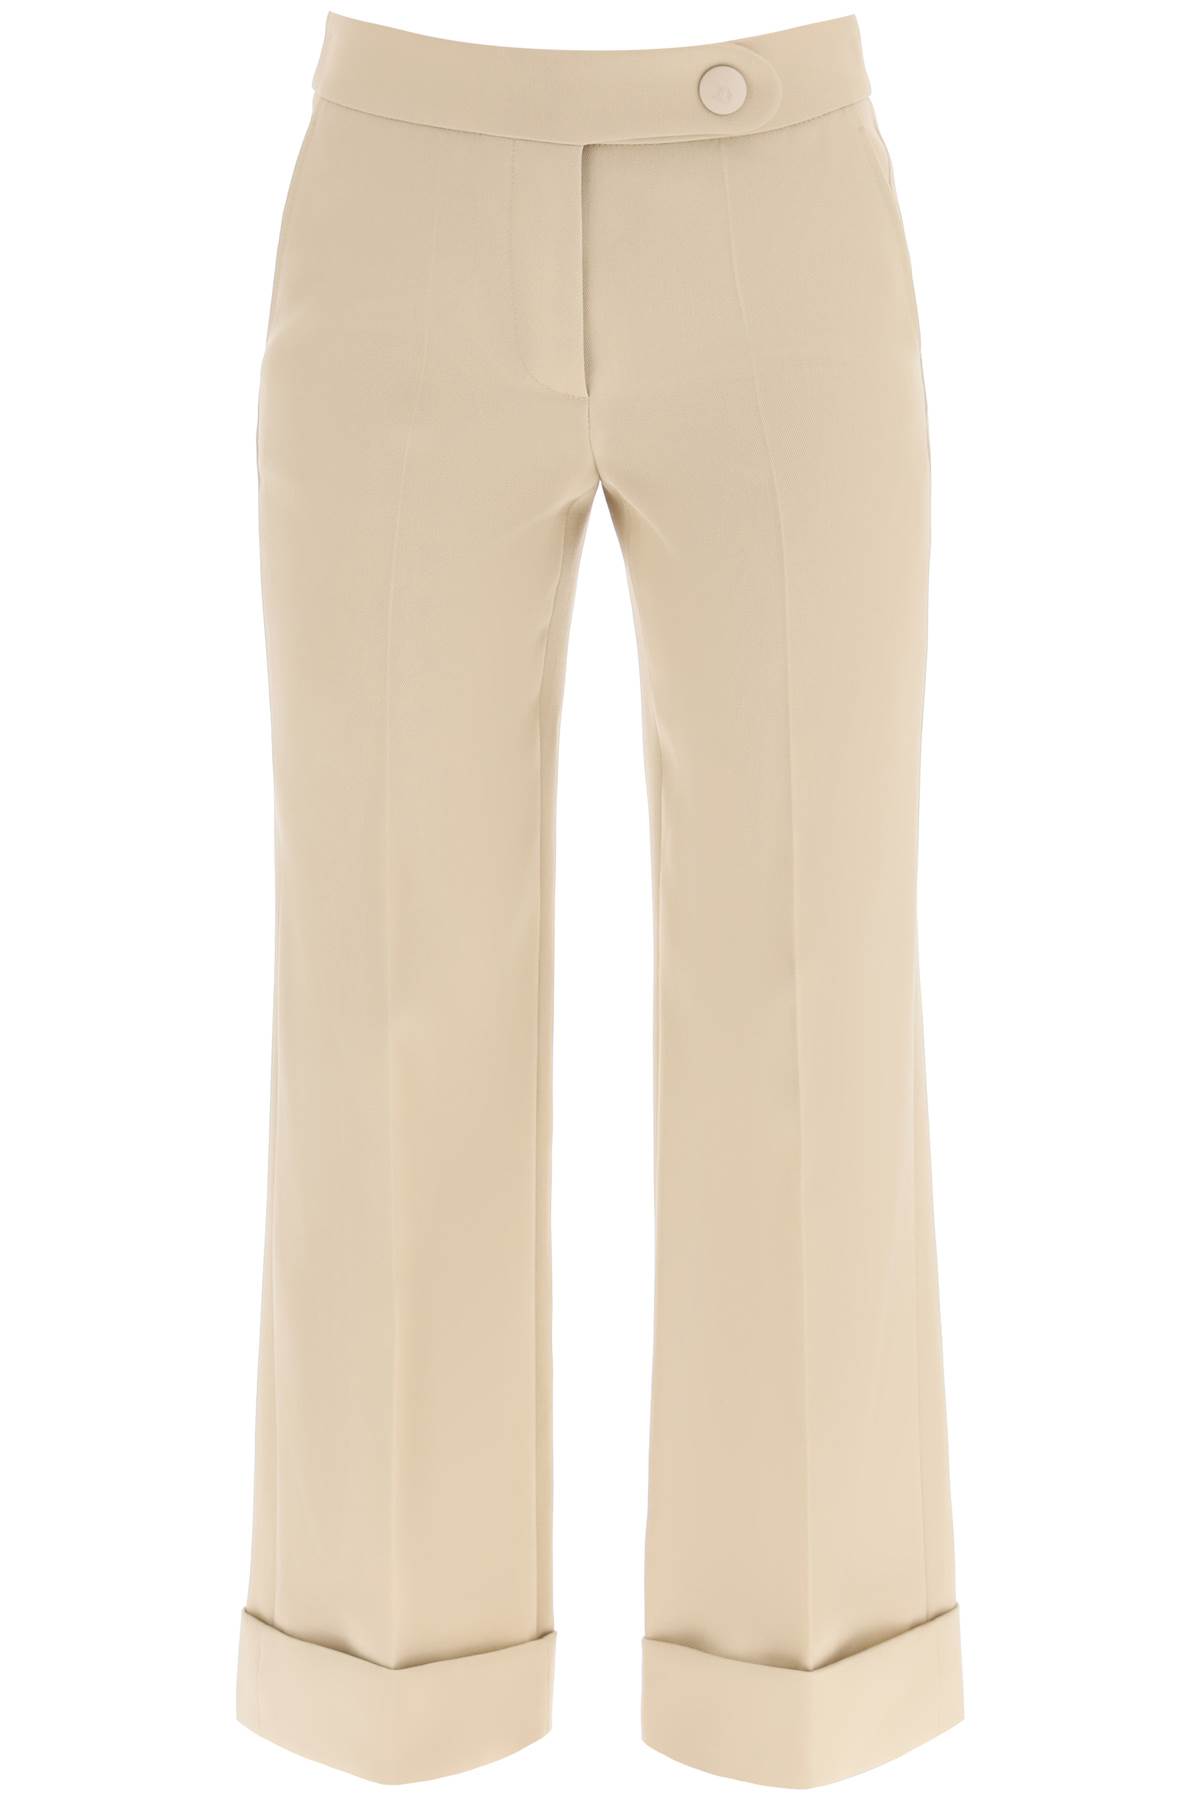 Lanvin Cropped Wool Trousers